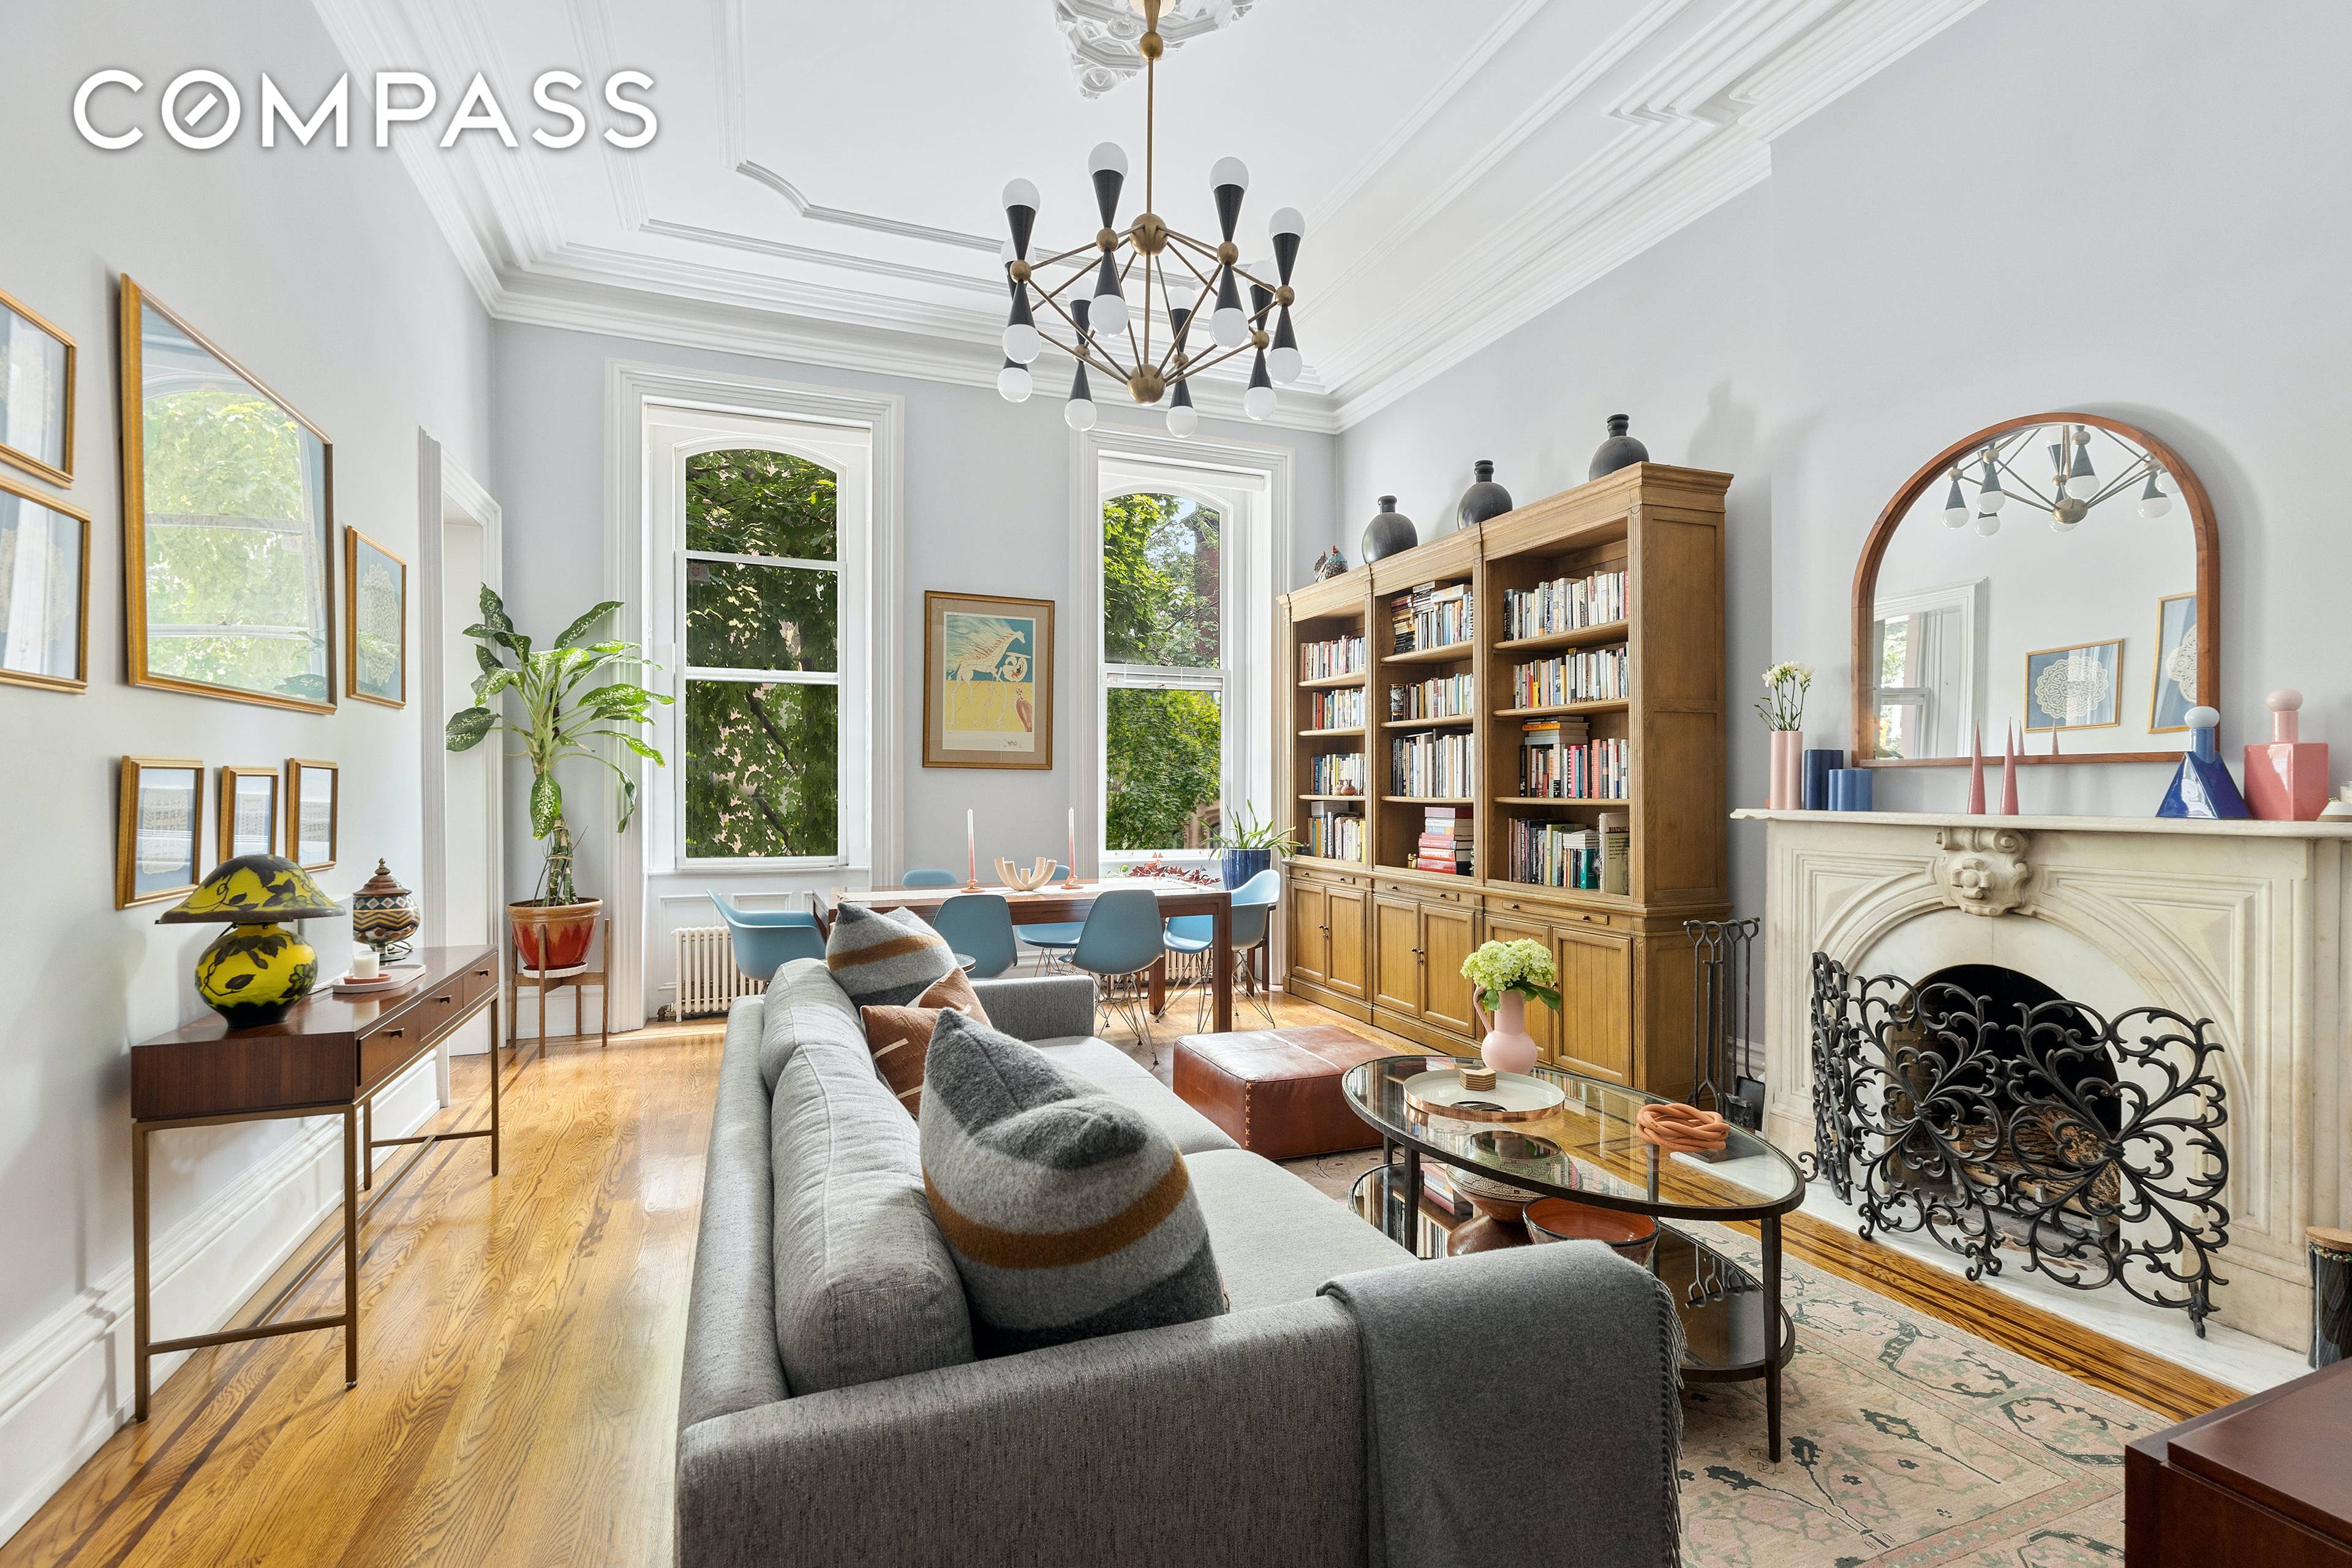 You can have it all a stately, historic Brooklyn condo with modern amenities and private outdoor space in the best location.